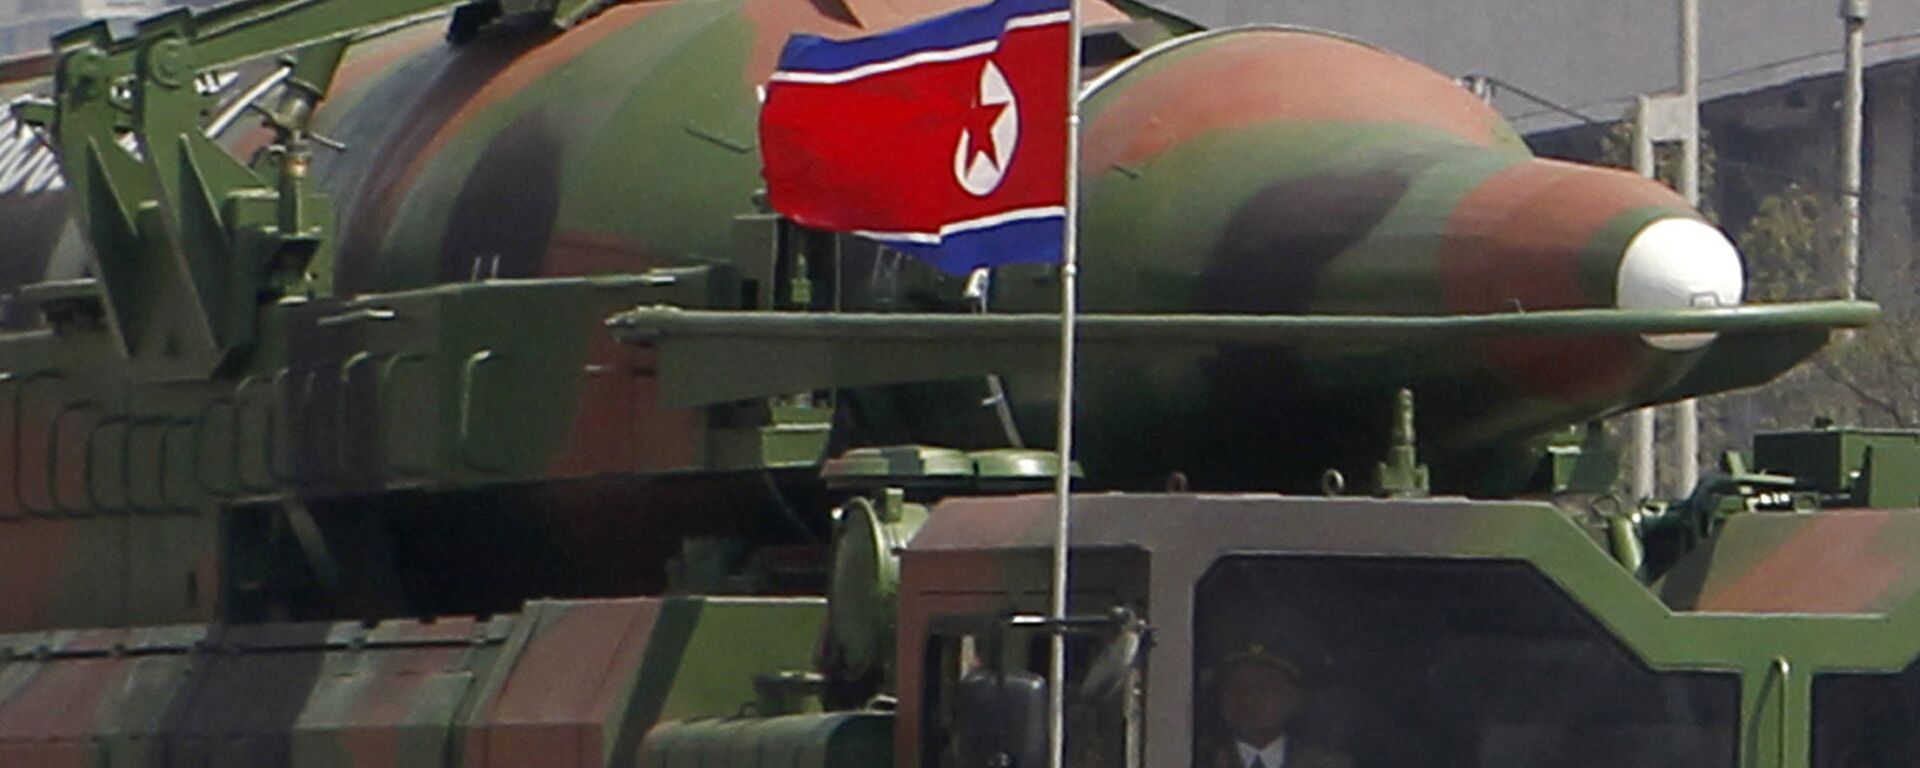 File photo, what appears to be a new missile is carried during a mass military parade at the Kim Il Sung Square in Pyongyang, North Korea, to celebrate the 100th anniversary of the country's founding father Kim Il Sung.  - 俄羅斯衛星通訊社, 1920, 13.06.2021